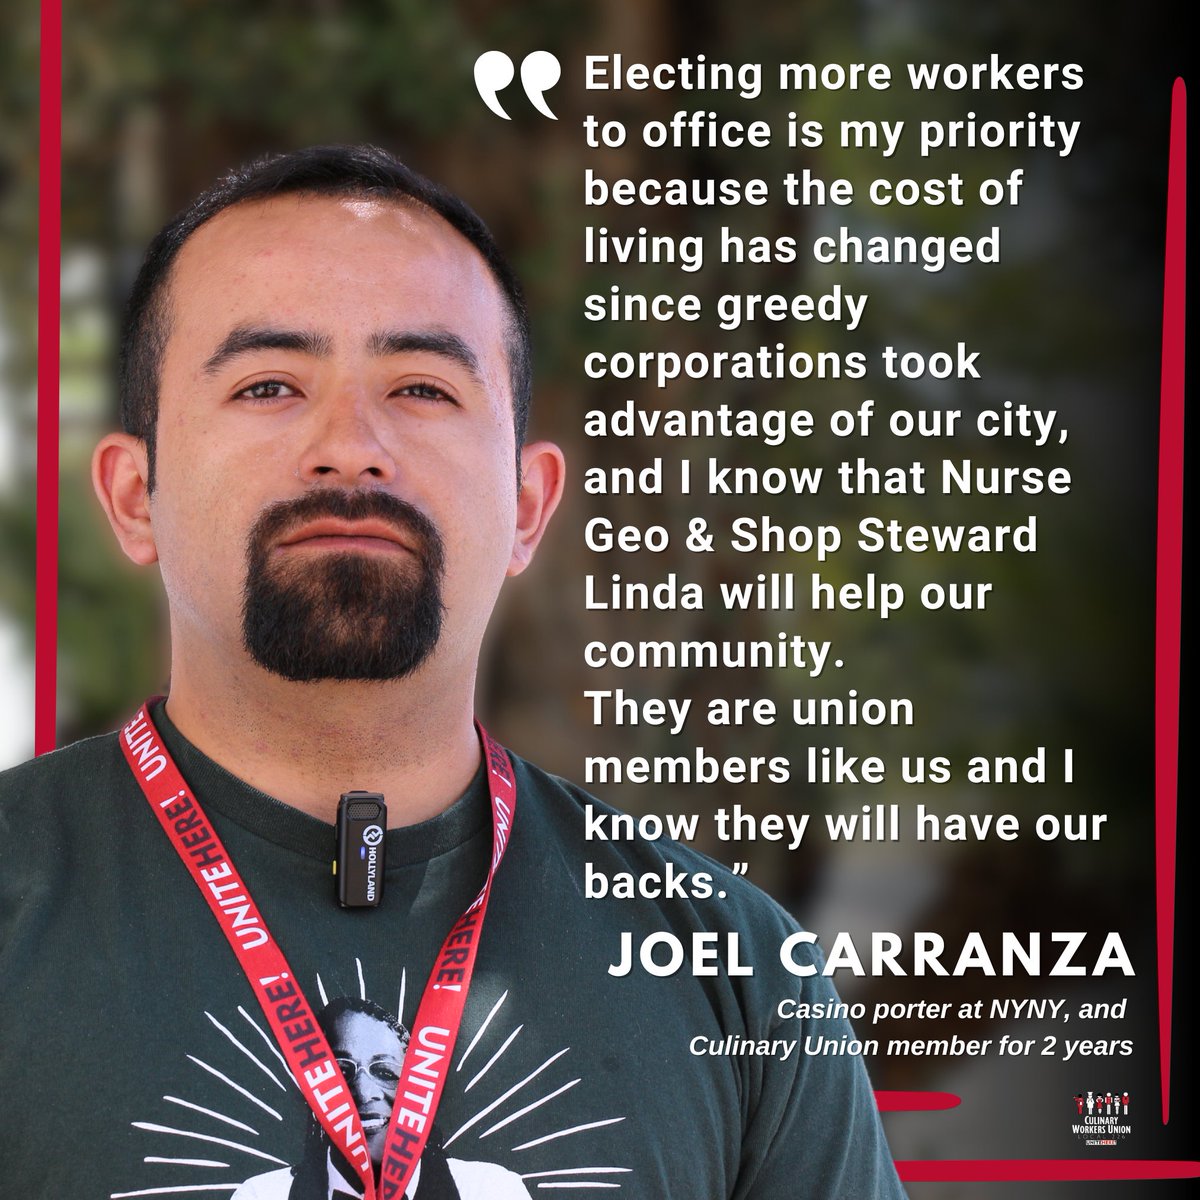 Meet Joel, casino porter & Culinary Union member: 'Electing more workers to office is my priority because the cost of living has changed since greedy corporations took advantage of our city & I know Nurse @GeoForNevada & @LindaForNevada will help our community.' #WeVoteWeWin